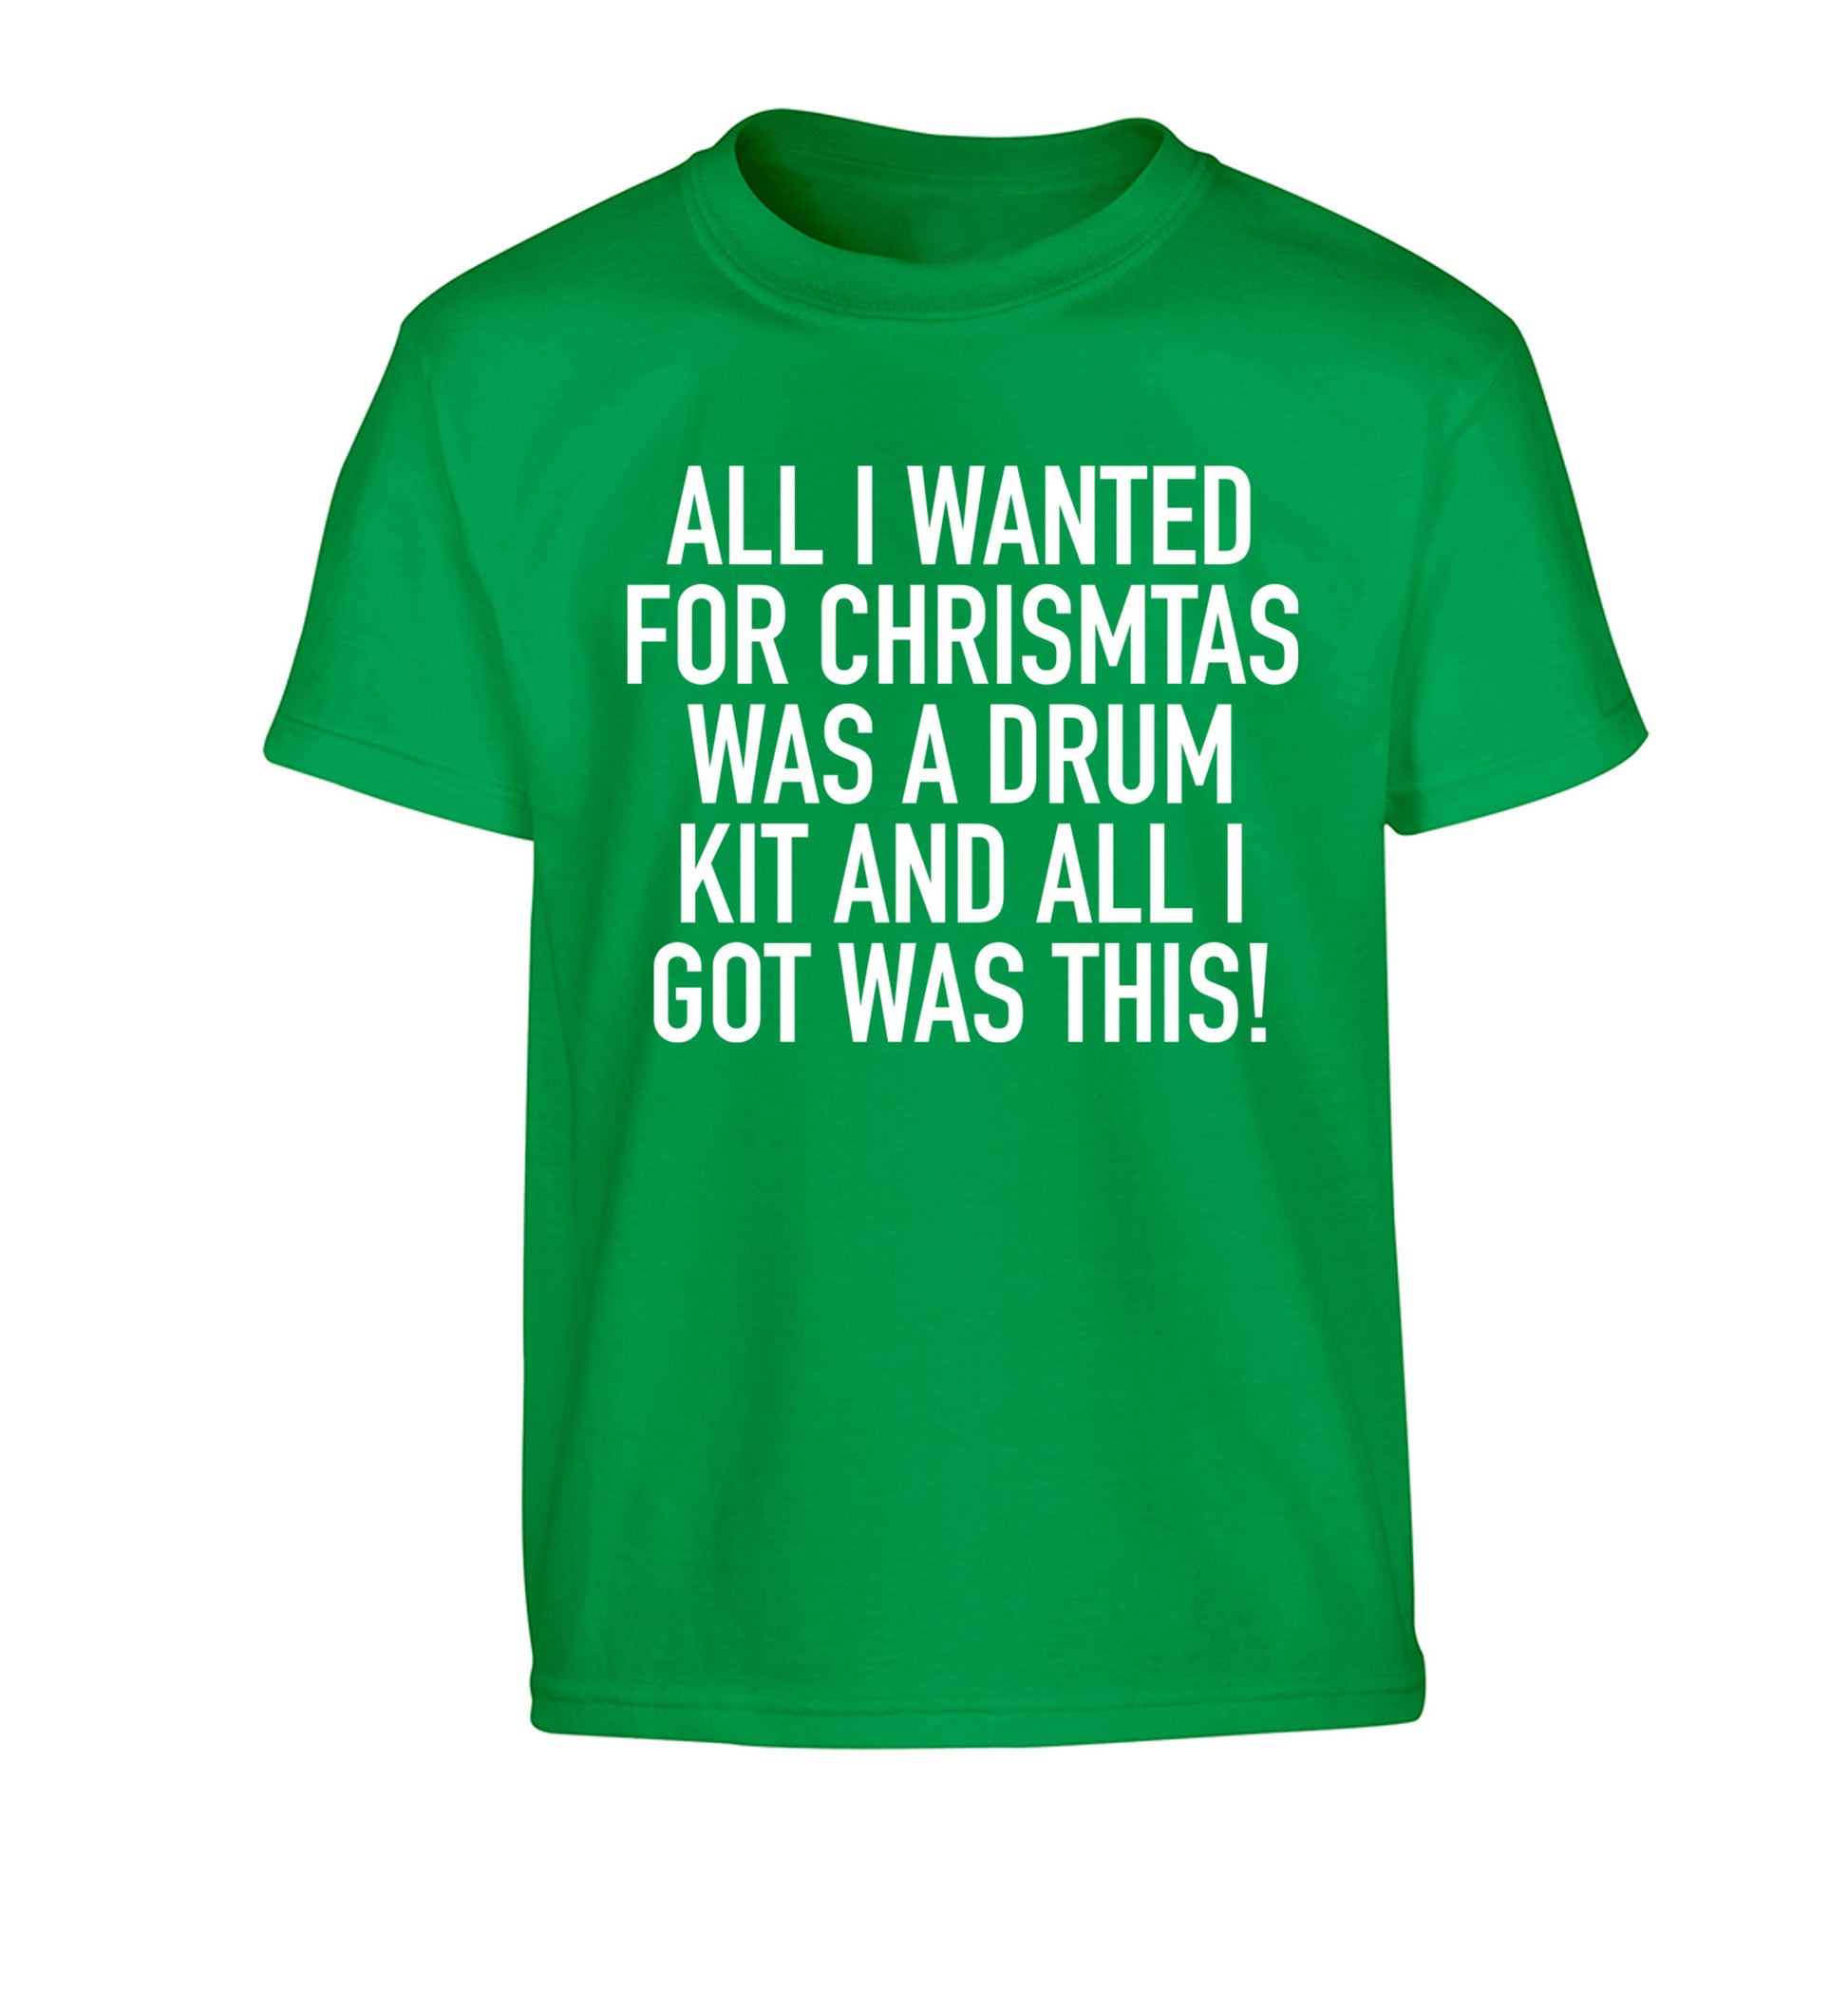 All I wanted for Christmas was a drum kit and all I got was this! Children's green Tshirt 12-14 Years